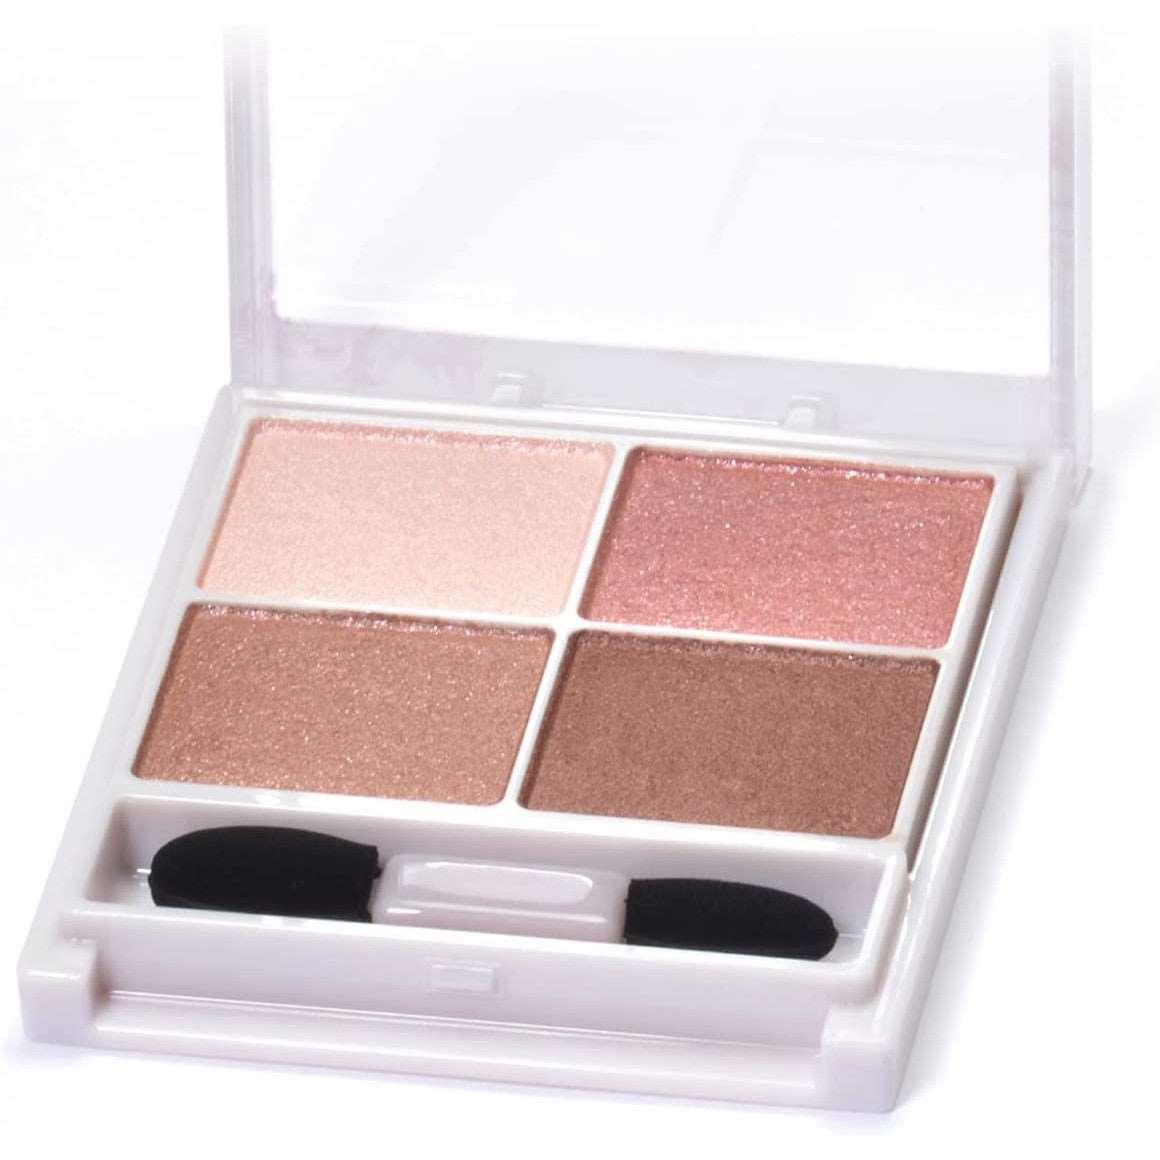 Canmake Silky Souffle Eyes Eyeshadow (Made in Japan)